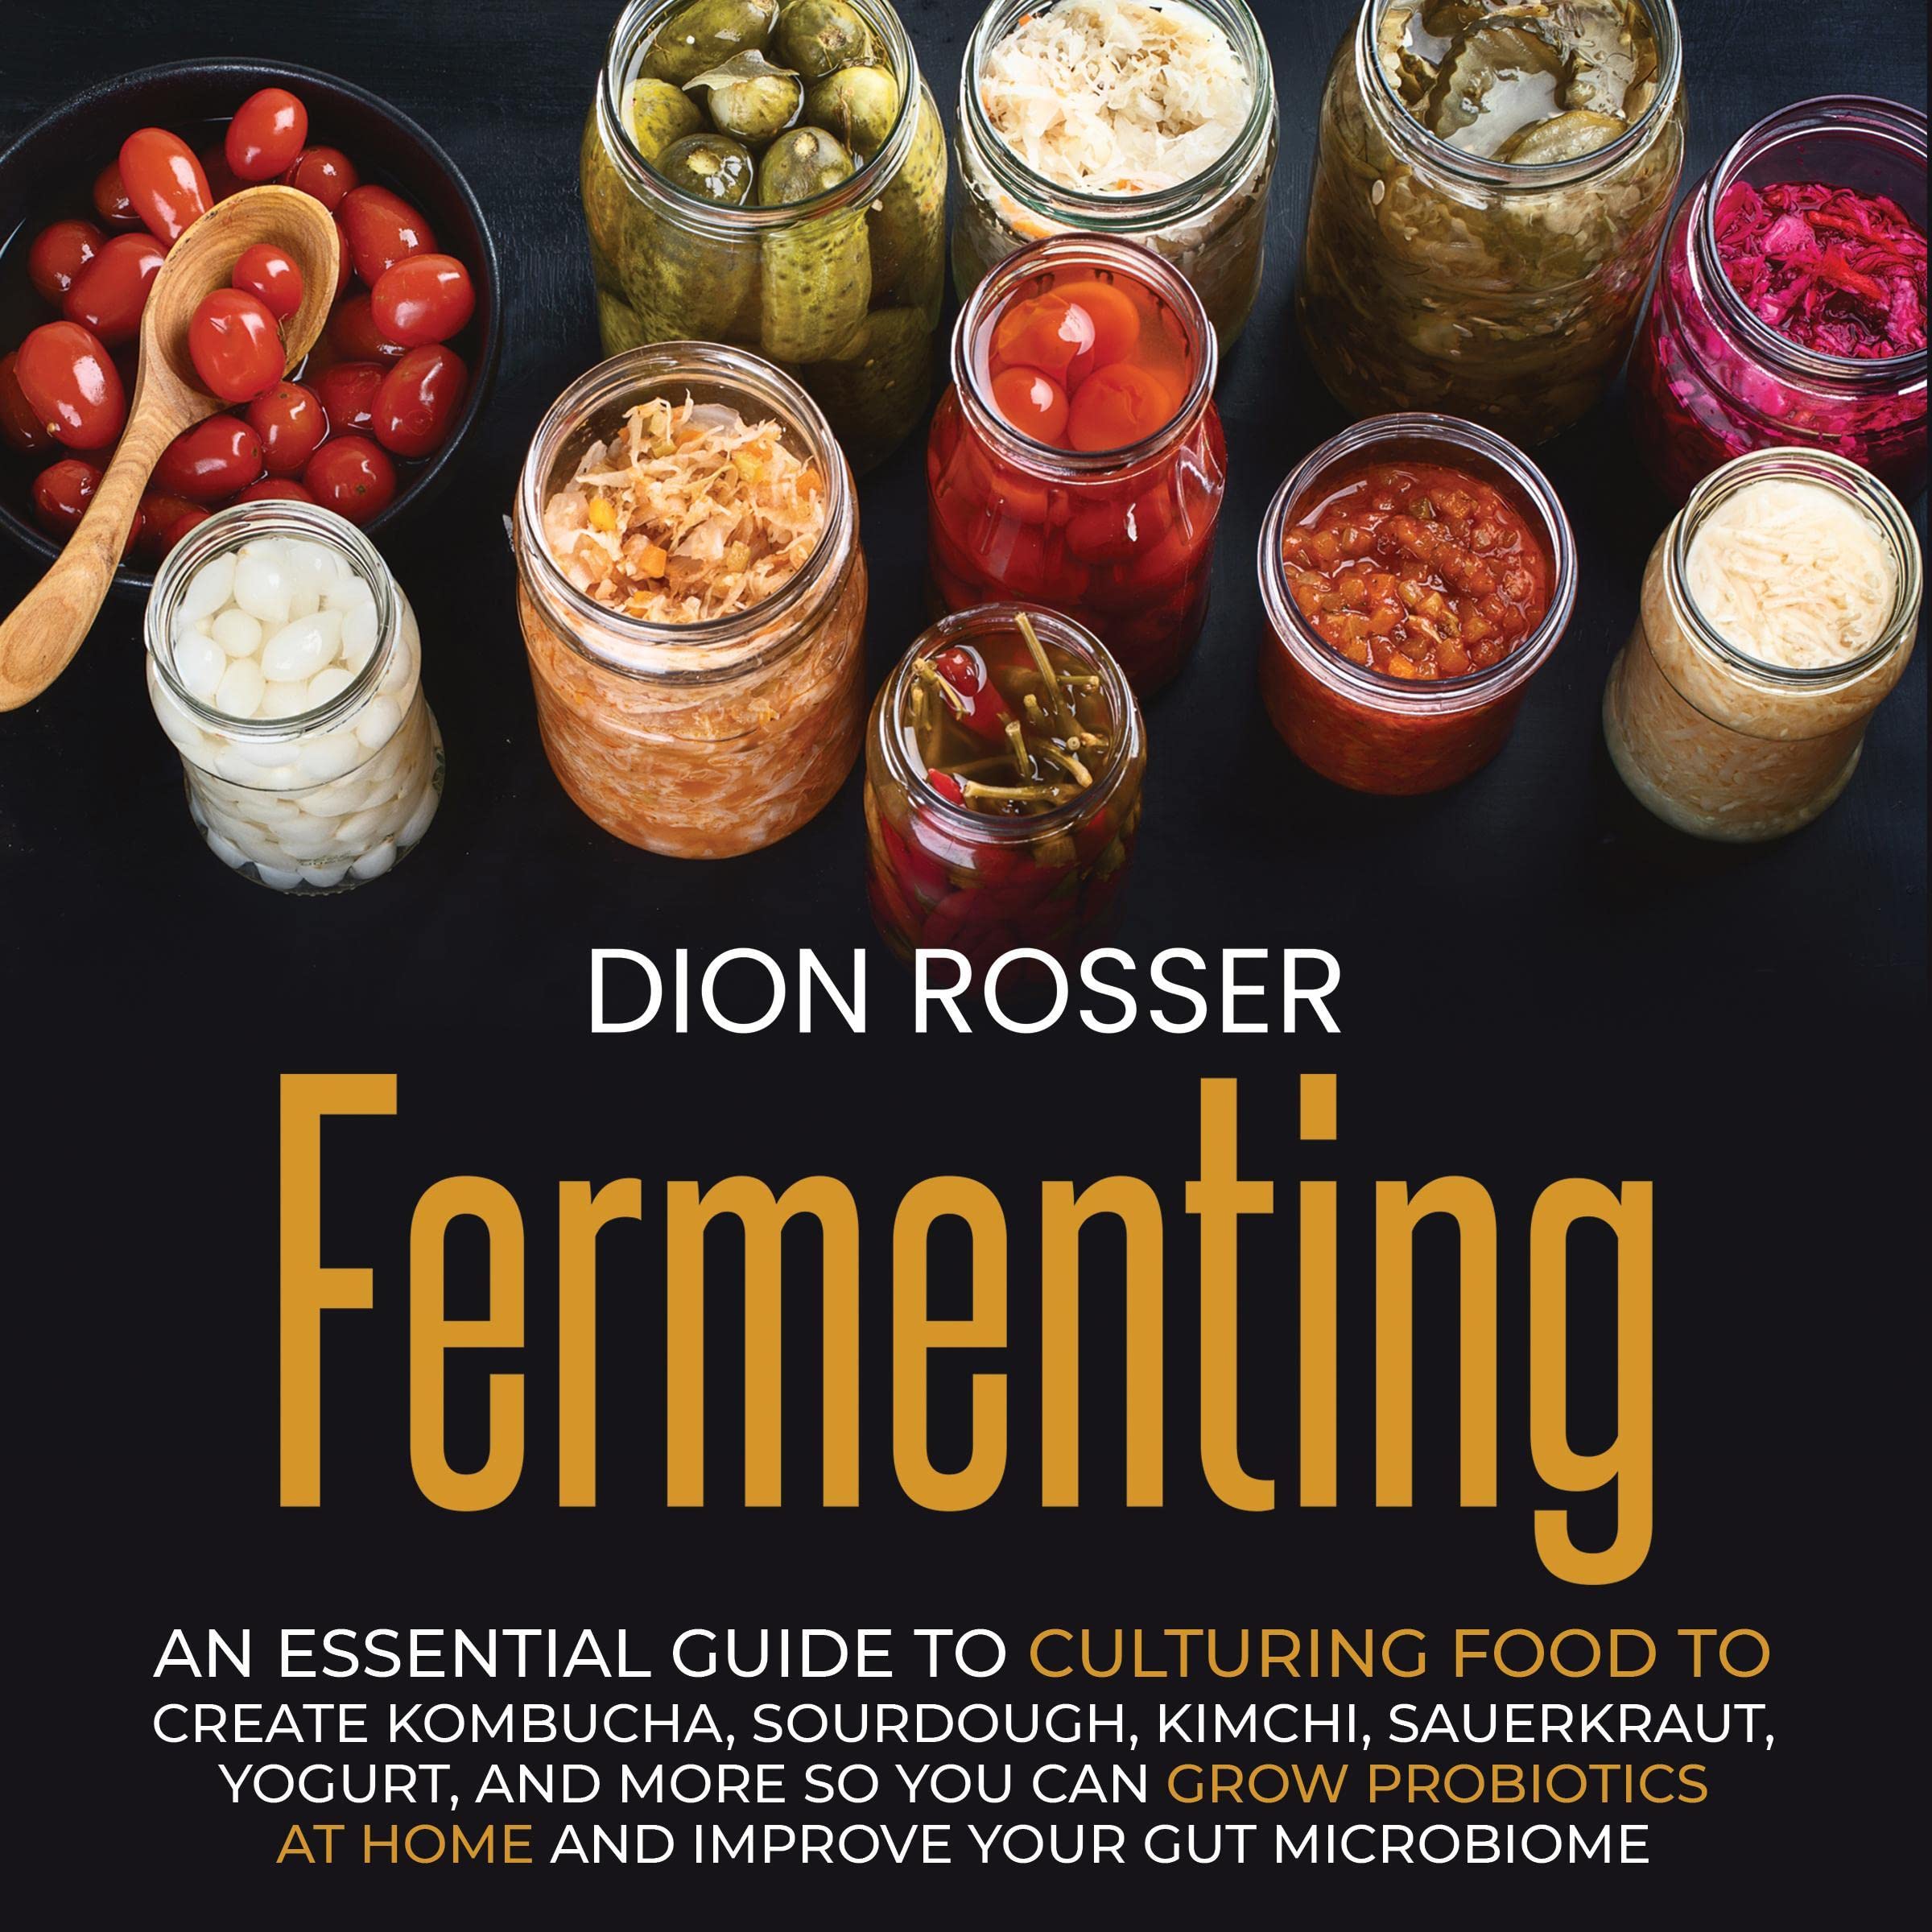 Fermenting: An Essential Guide to Culturing Food to Create Kombucha, Sourdough, Kimchi, Sauerkraut, Yogurt, and More So You Can Grow Probiotics at Home and Improve Your Gut Microbiome